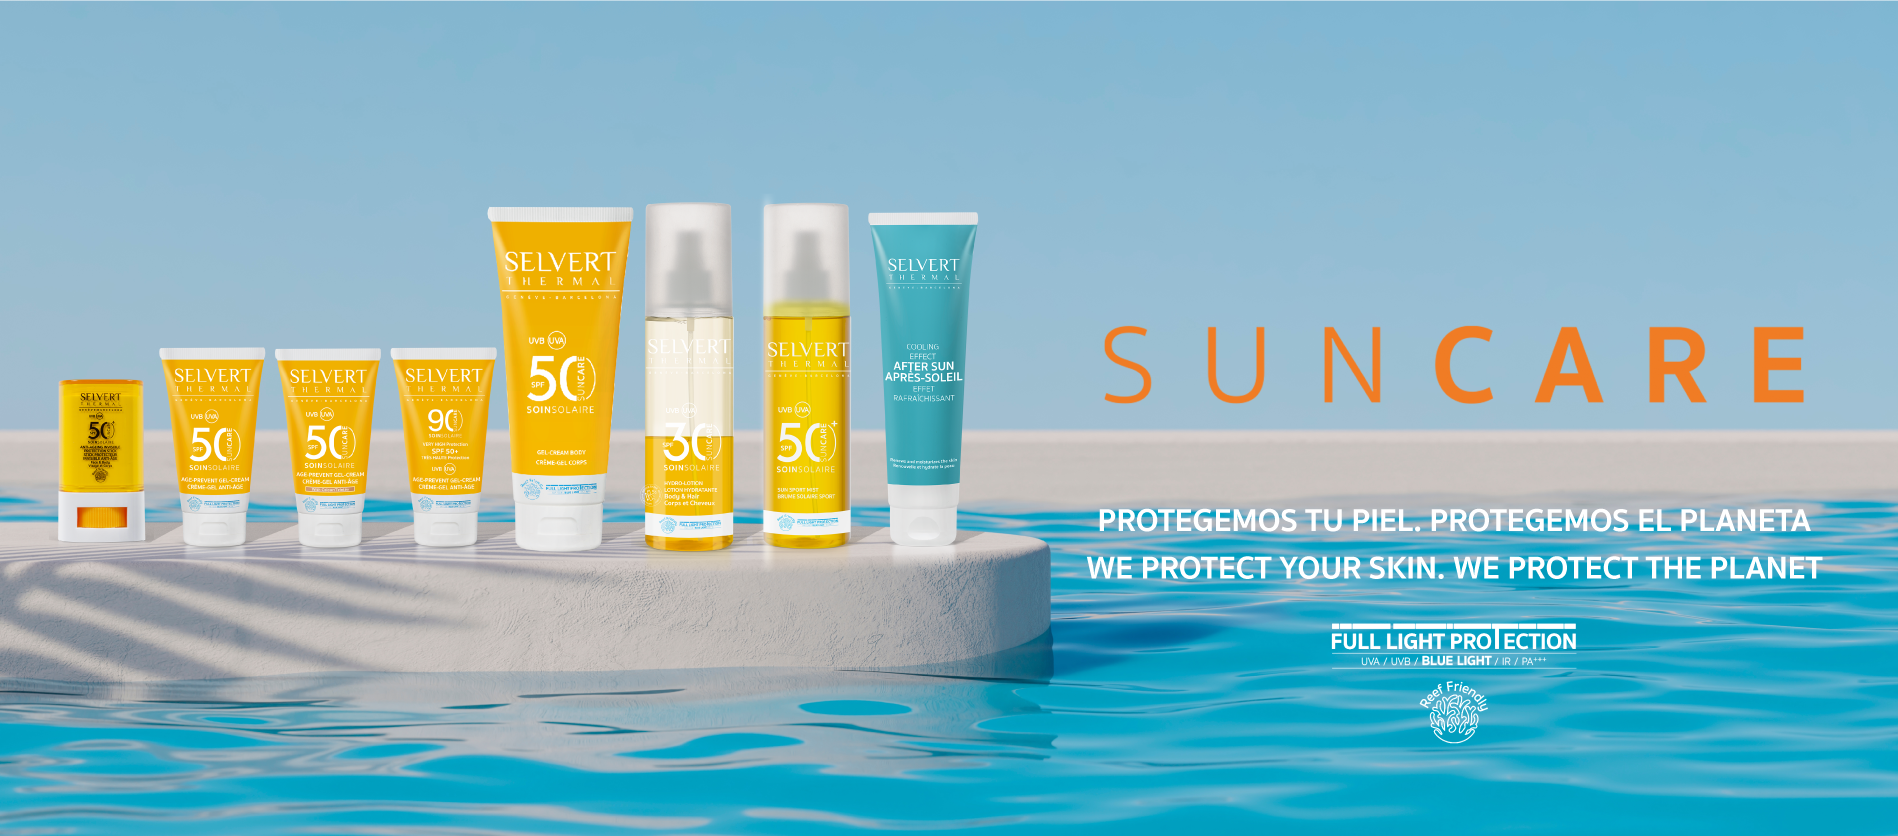 SUN CARE <p>WE PROTECT YOUR SKIN. WE PROTECT THE PLANET</p>
<p>&nbsp;</p>
<p>New facial and body sun care line providing latest-generation lightweight textures, protecting the skin from photoageing while preserving the marine ecosystem thanks to our Reef Friendly formula.<br />The entire range has been formulated with our revolutionary Full Light Protection technology as well as Pro-Vitamin D&reg;, an active ingredient that promotes the synthesis of Vitamin D in the skin, helping to improve its barrier function.<br />Products are fragranced with a delicious blend of citrus and vanilla notes and are water resistant.</p>
<p>&nbsp;</p>
<p>Thanks to this innovative technology, the skin is protected from a broad spectrum of radiation, preventing photoageing.</p>
<ul>
<li>UVB + UVA protection</li>
<li>IR protection (infrared radiation)</li>
<li>Blue light protection (electromagnetic waves emitted by screens)<br /><br /></li>
</ul>
<p style="text-align: center;">We have always taken care of your skin. Now we&rsquo;re also committed to the planet.</p>
<p><br />That&rsquo;s why the entire Selvert Thermal sun care range has been formulated to be <strong>100% free of Oxybenzone and Octinoxate</strong>, components that severely damage coral reefs around the world.</p>